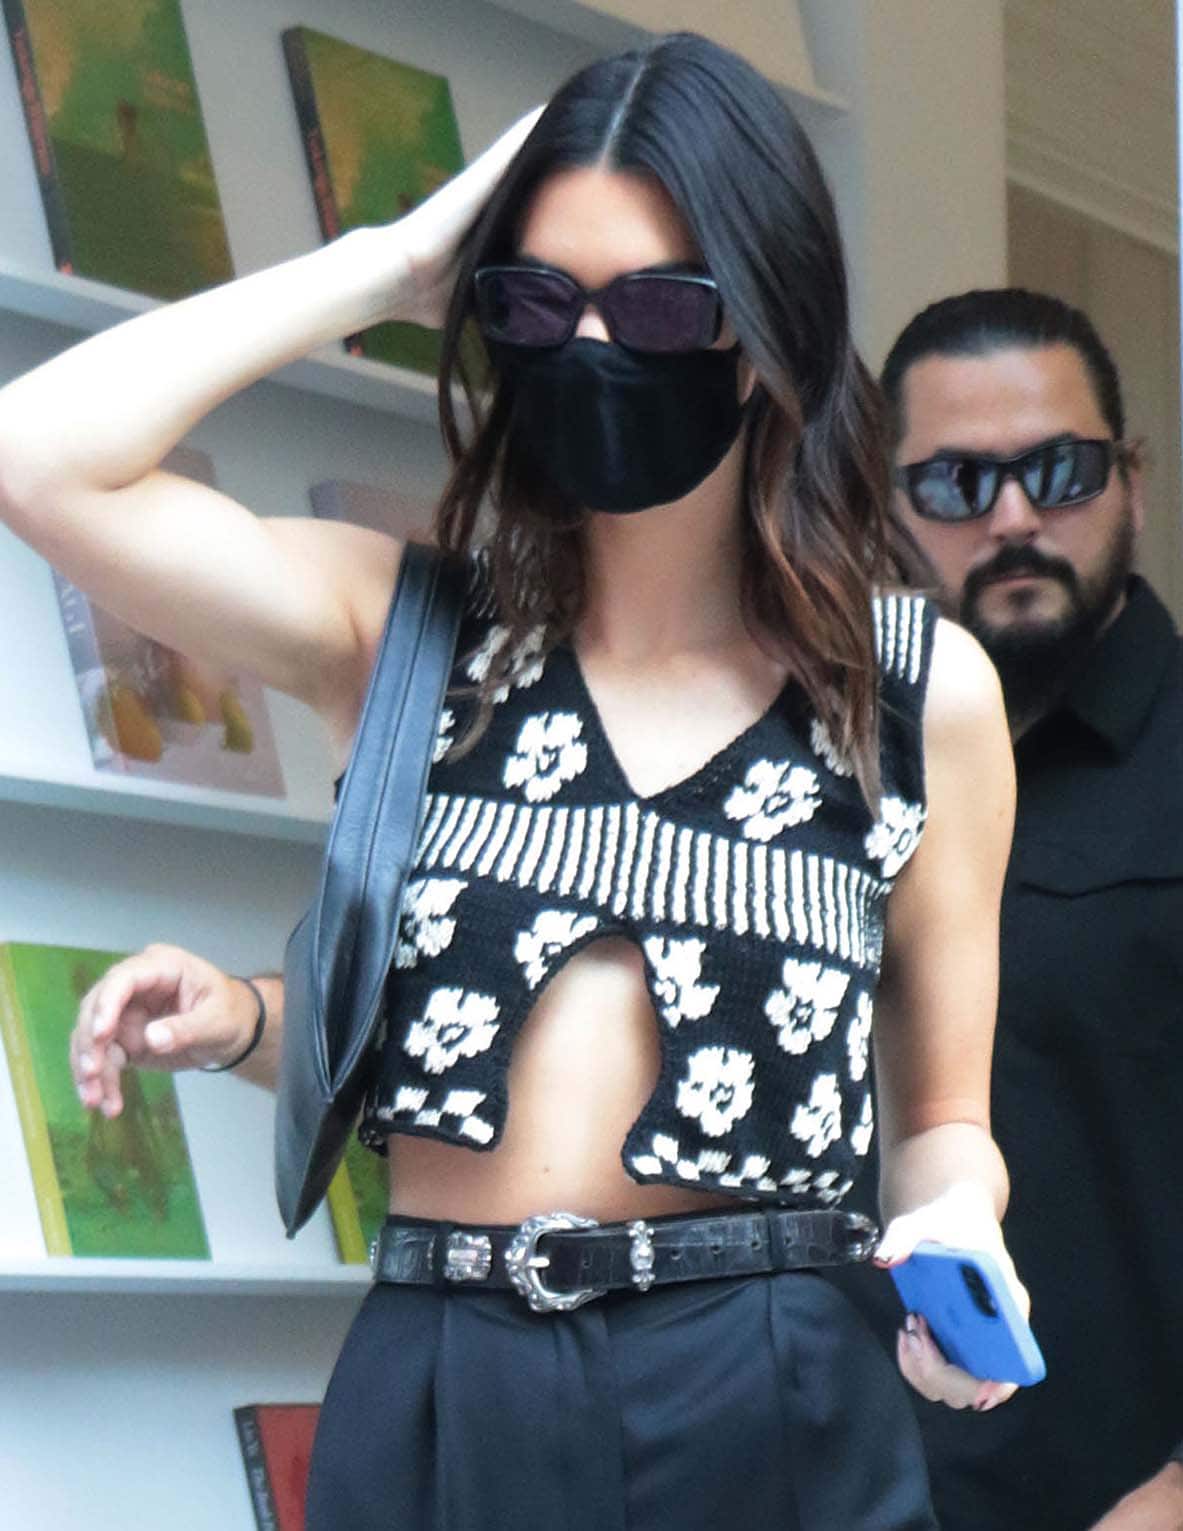 Kendall Jenner wears her brunette tresses down and covers her face with black rectangular sunglasses and a face mask